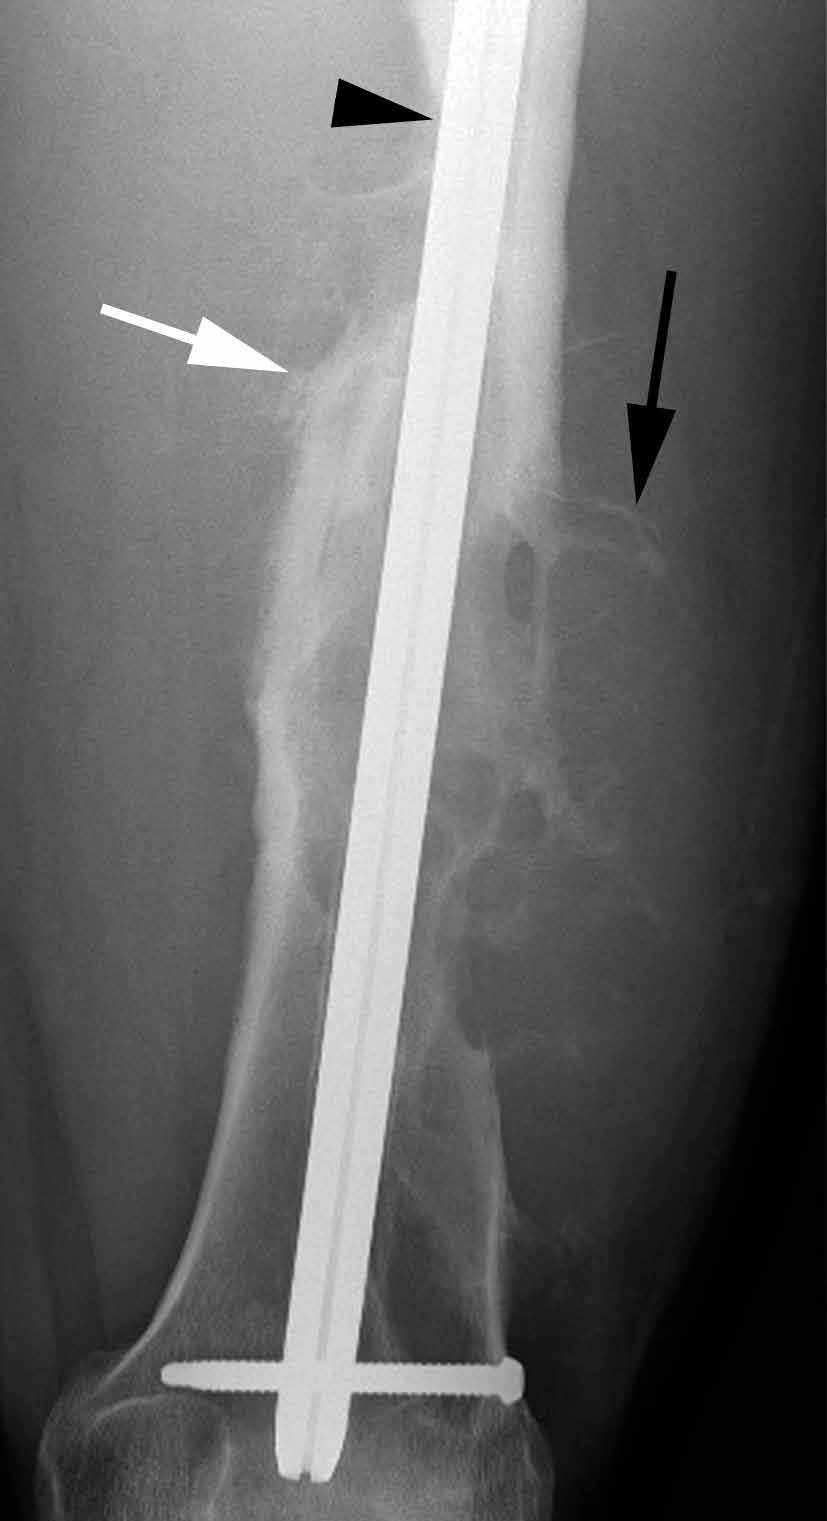 before antegrade intramedullary interlocked rod fixation. The histologic specimen was reported by the referring pathologist as being consistent with a unicameral bone cyst with hemorrhage.